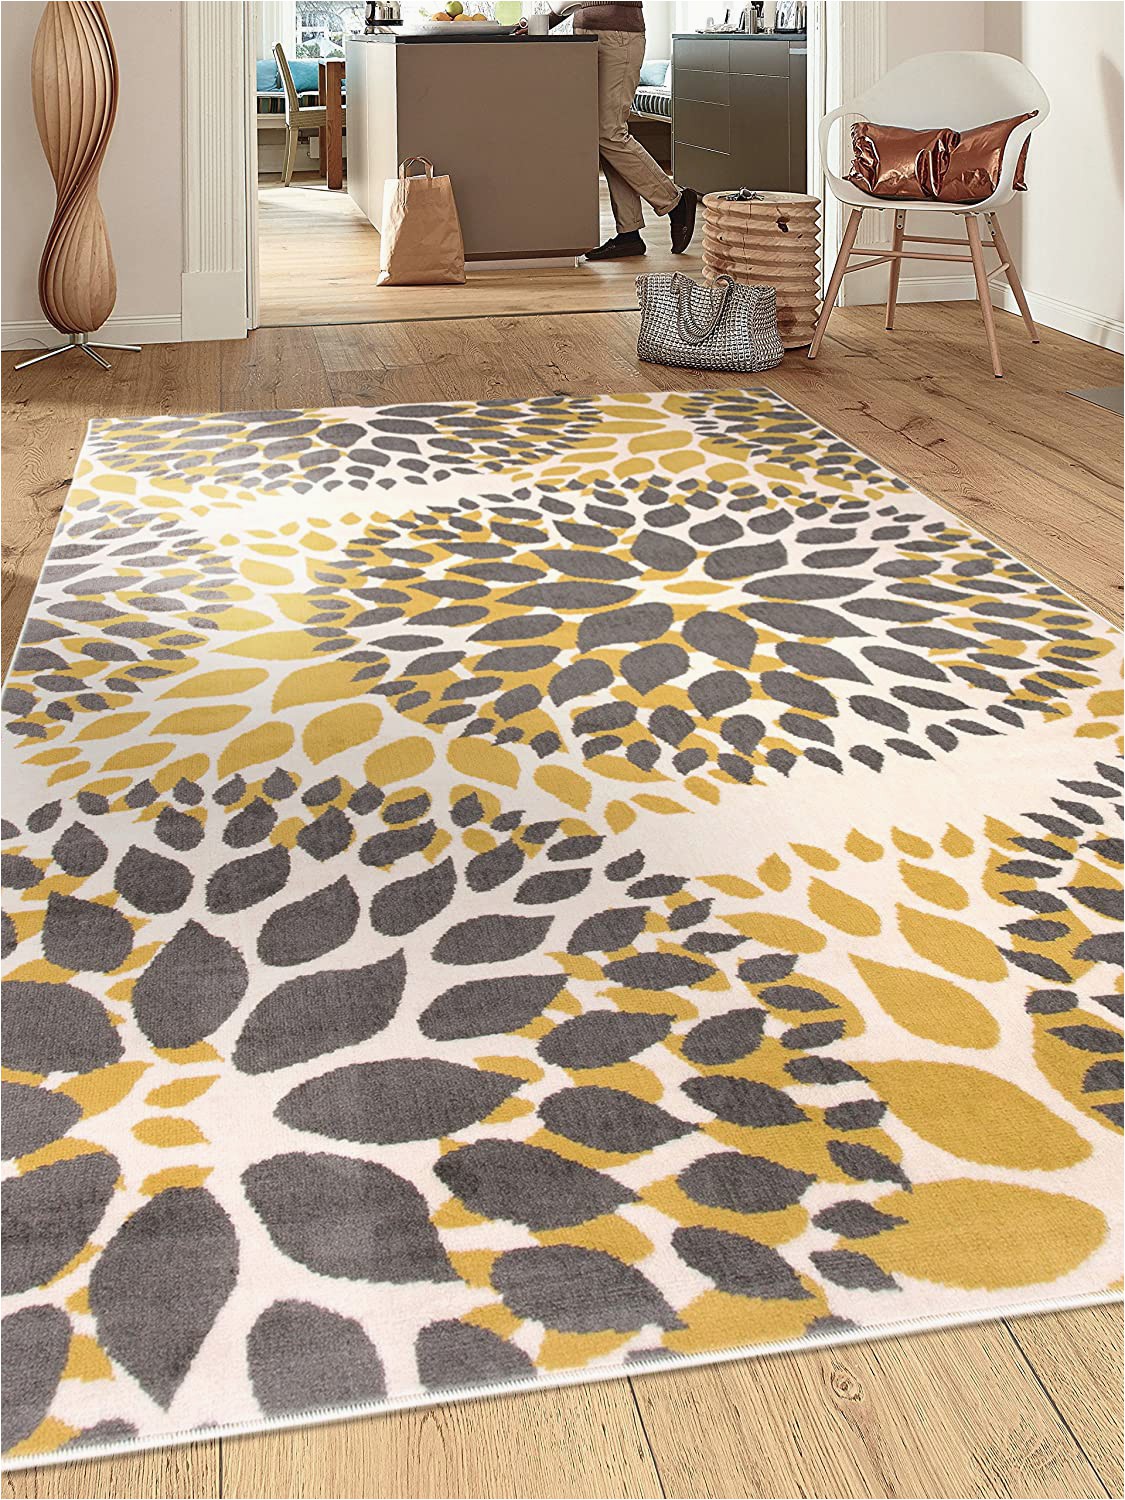 5 by 7 area Rugs at Lowes Modern Floral Circles Design area Rugs 7 6" X 9 5" Yellow